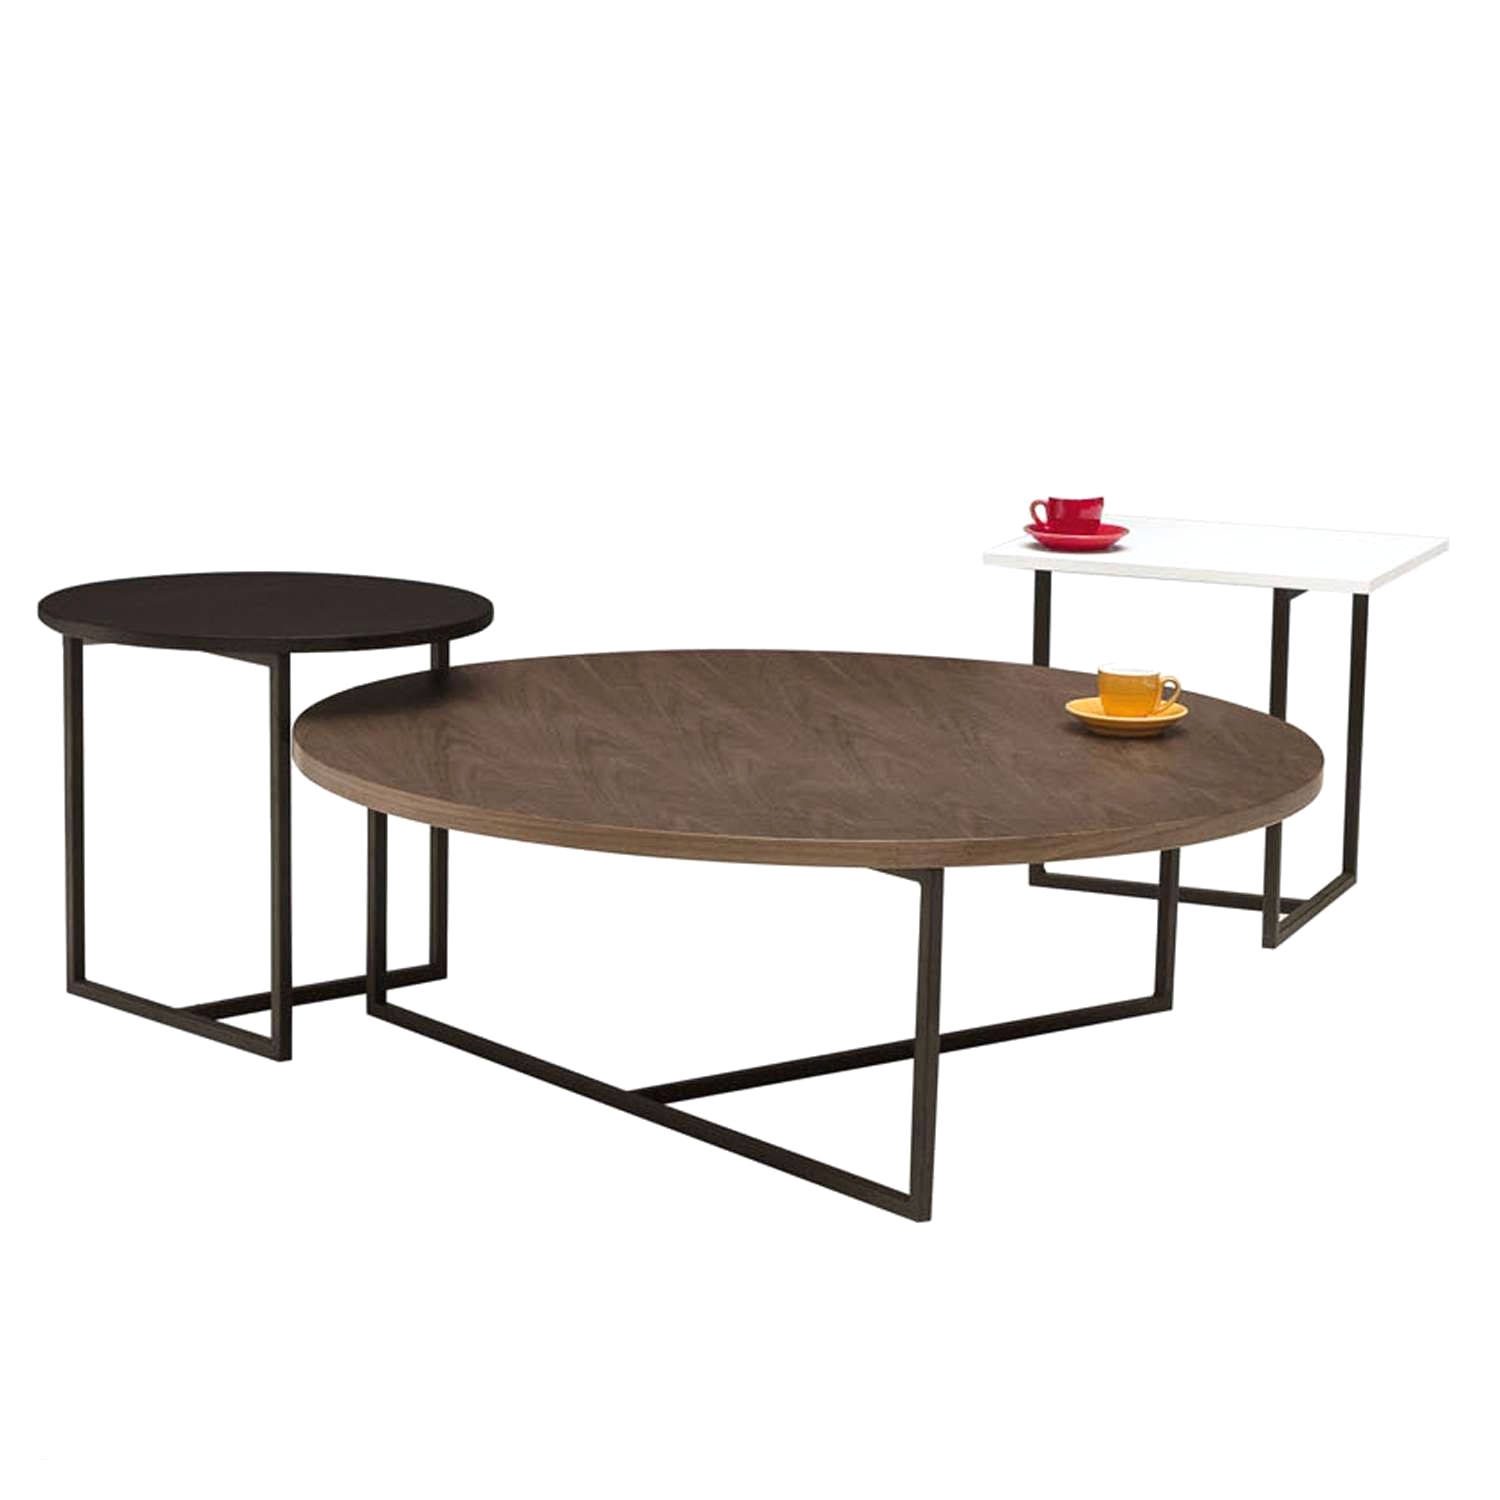 Where to Buy Coffee Tables Near Me Unique Patio End Tables Unique Coffee Table Rowan Od Outdoor Round Coffee